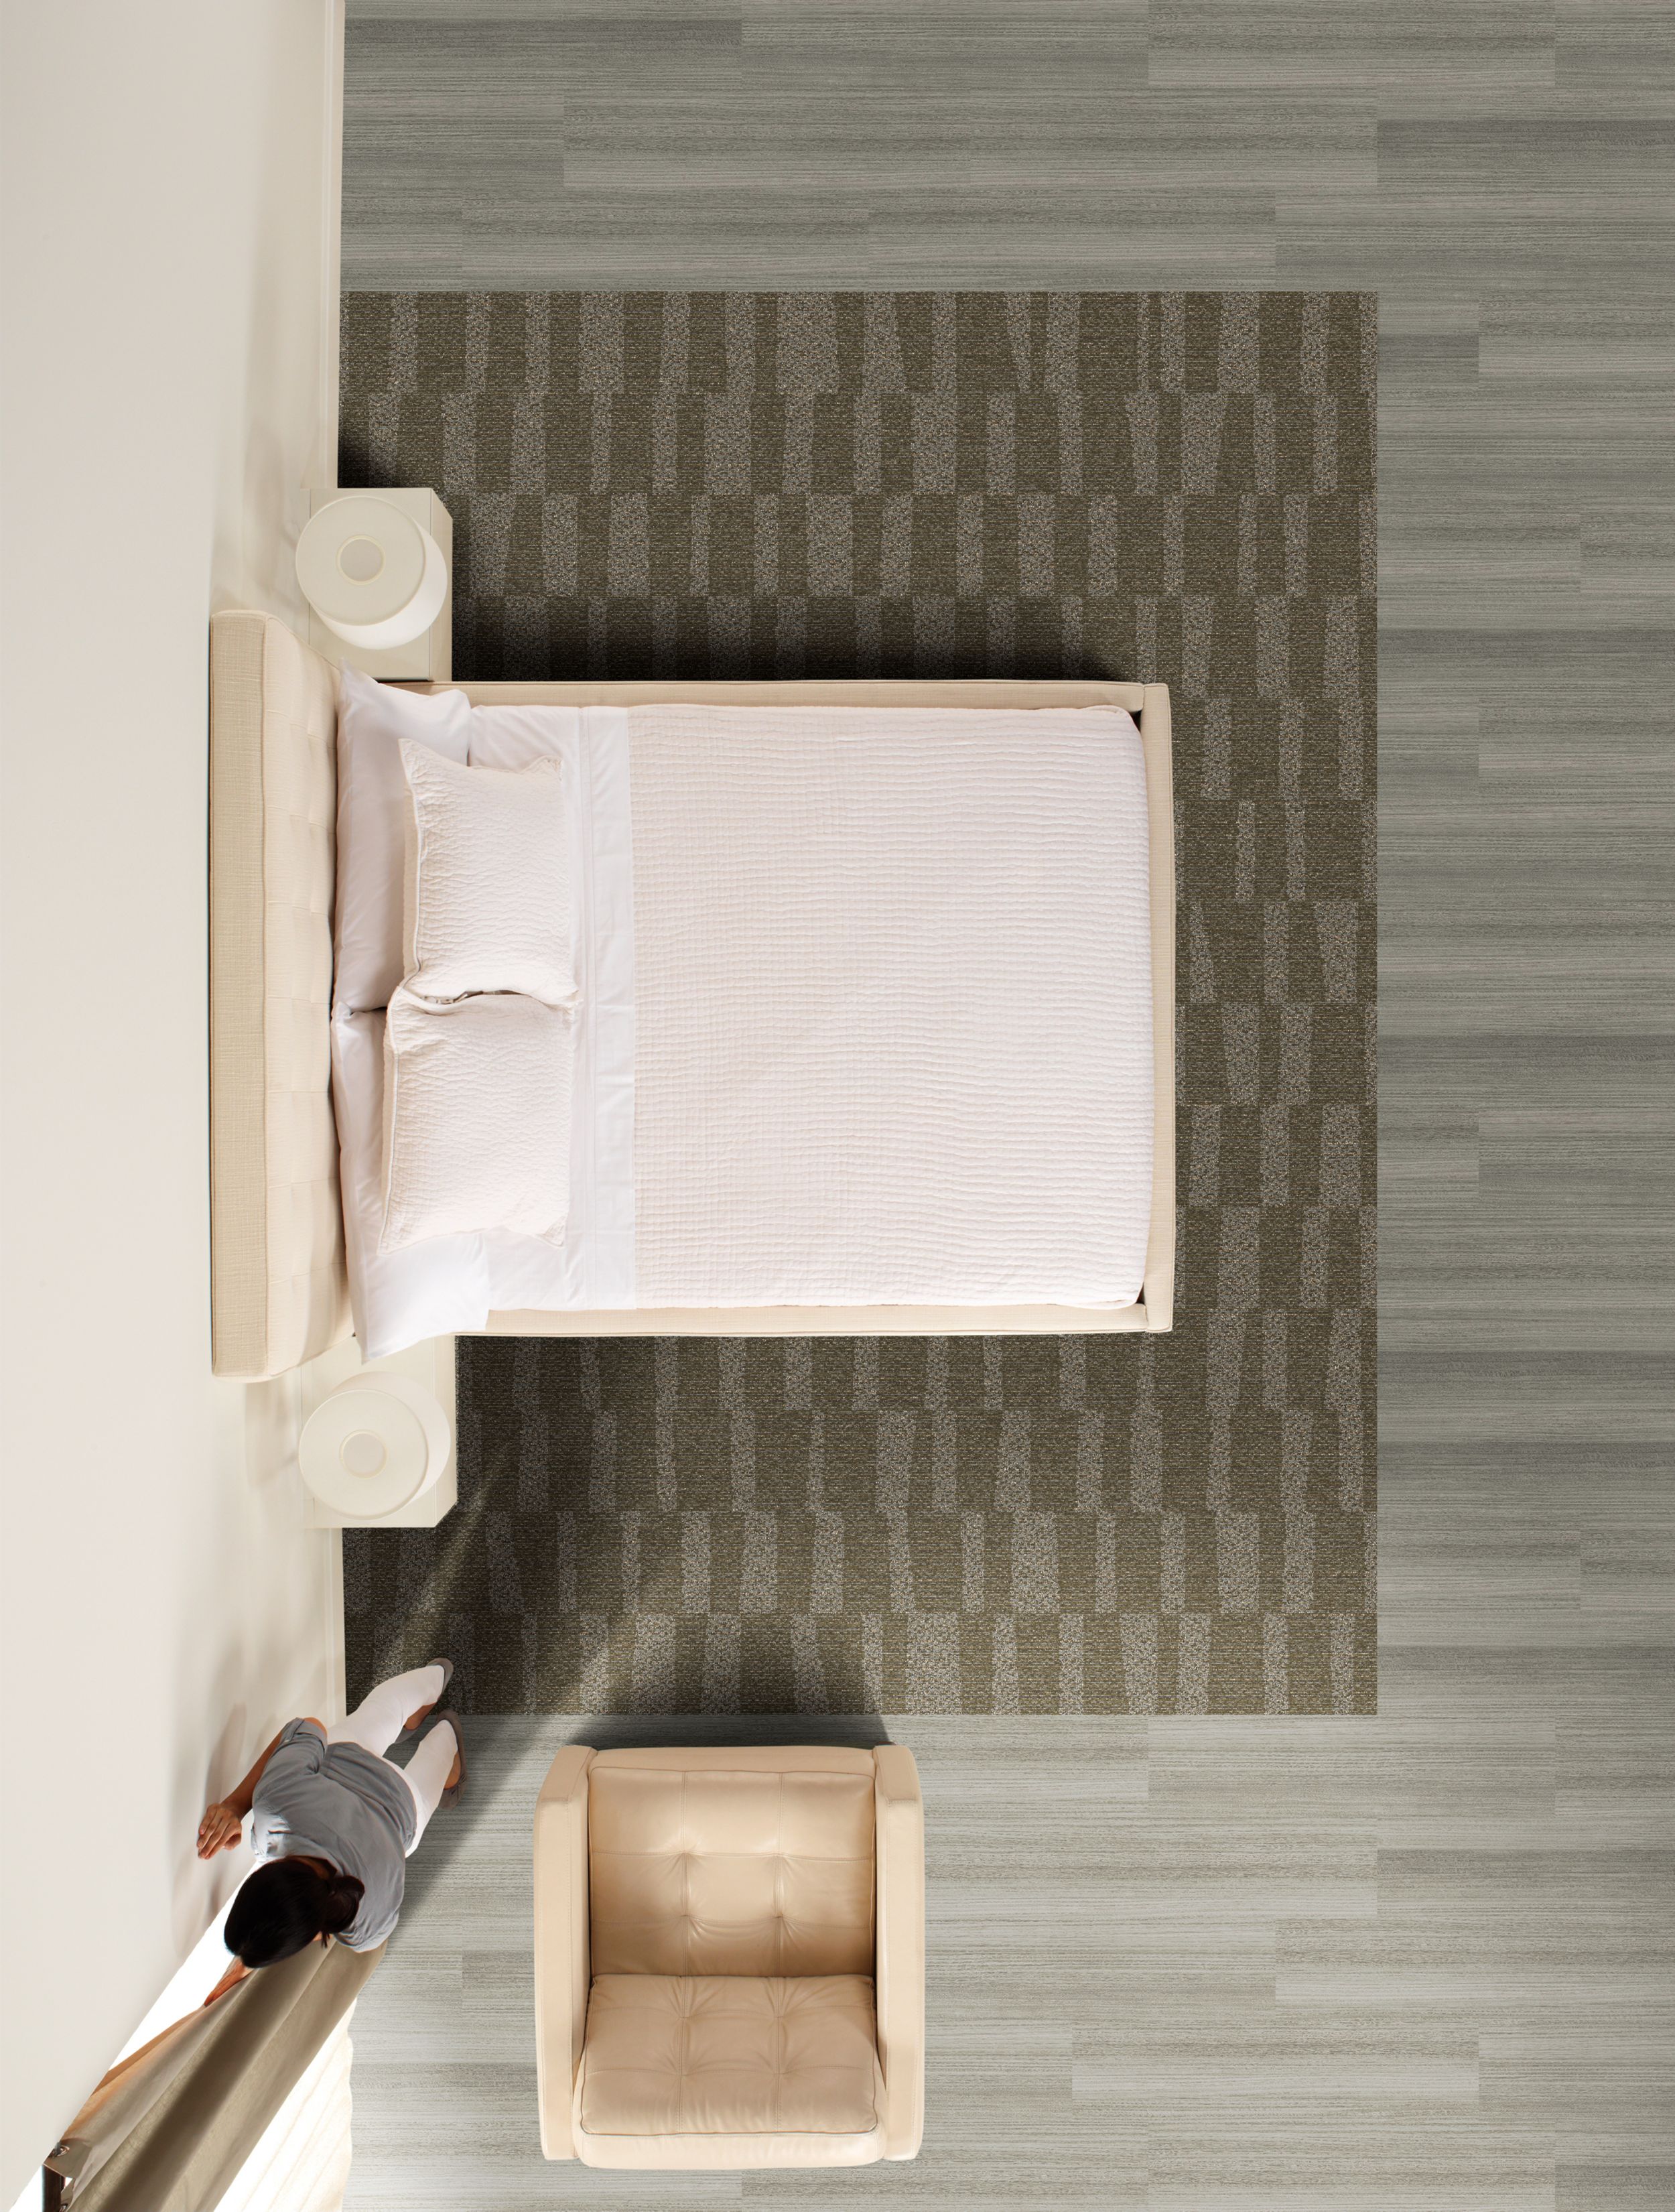 Interface RMS 706 plank carpet tile and Textured Woodgrains LVT in hotel guest room imagen número 3